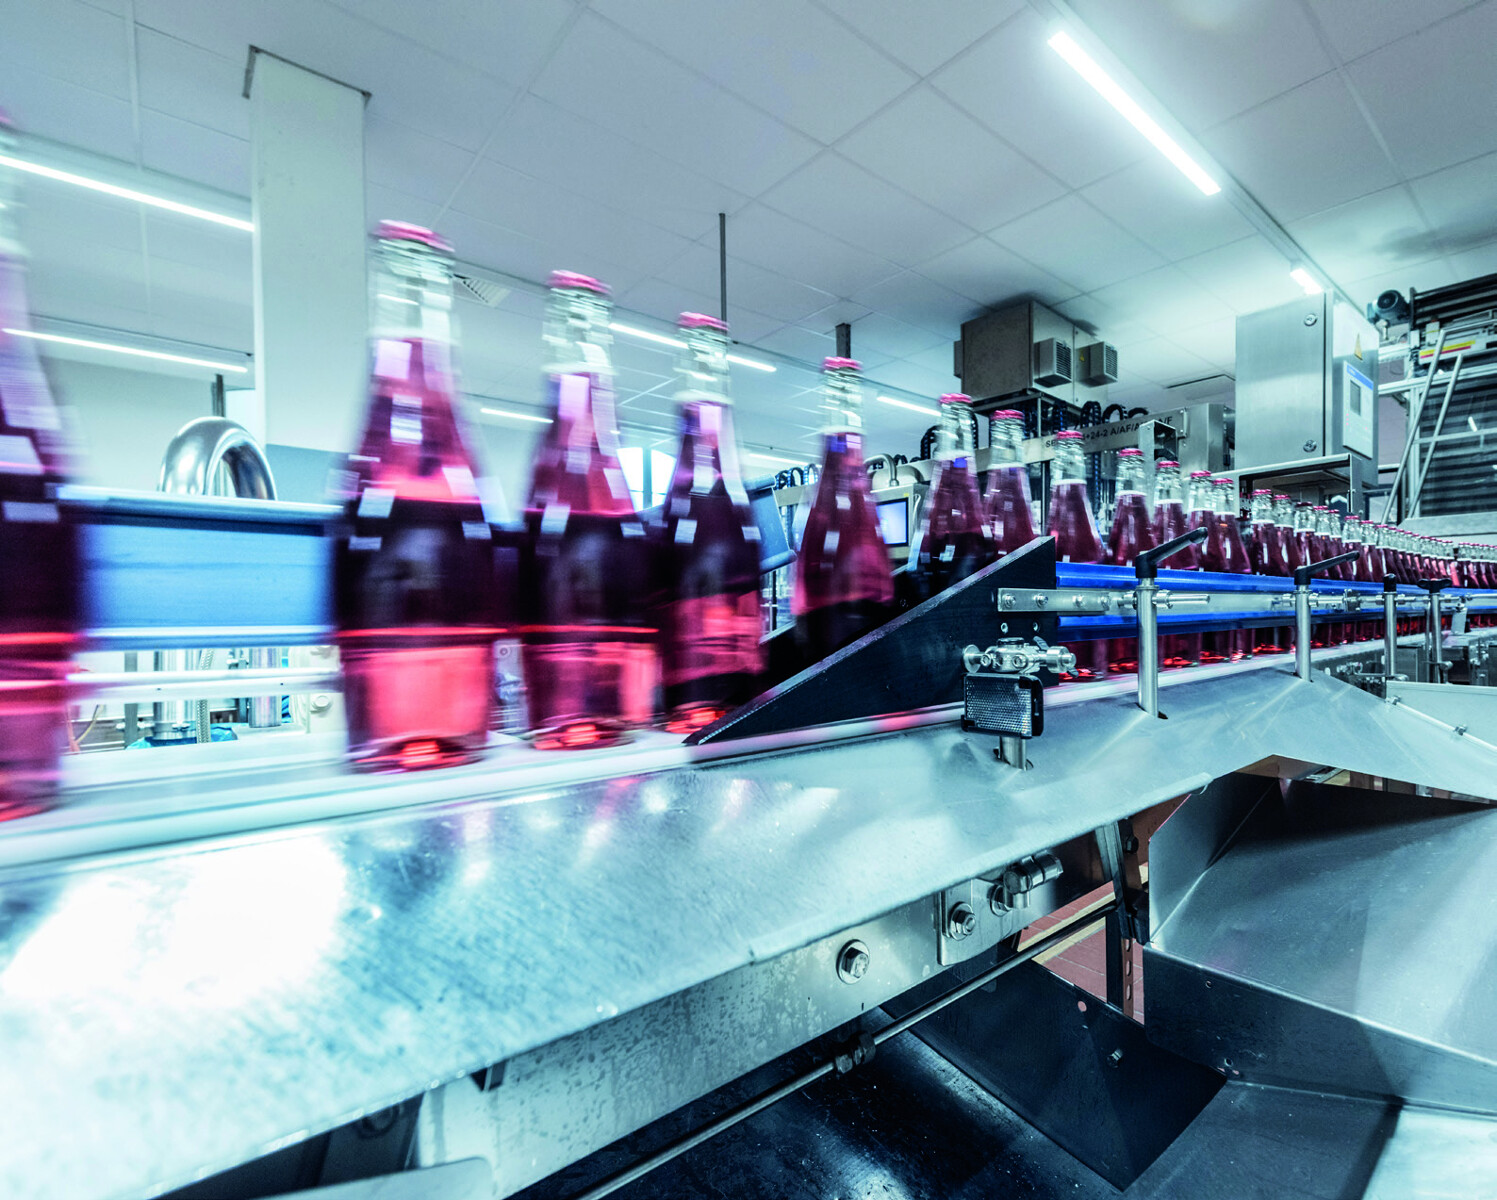 Dealcoholisation system: KSB pumps for the hygienic production of alcohol-free sparkling wine